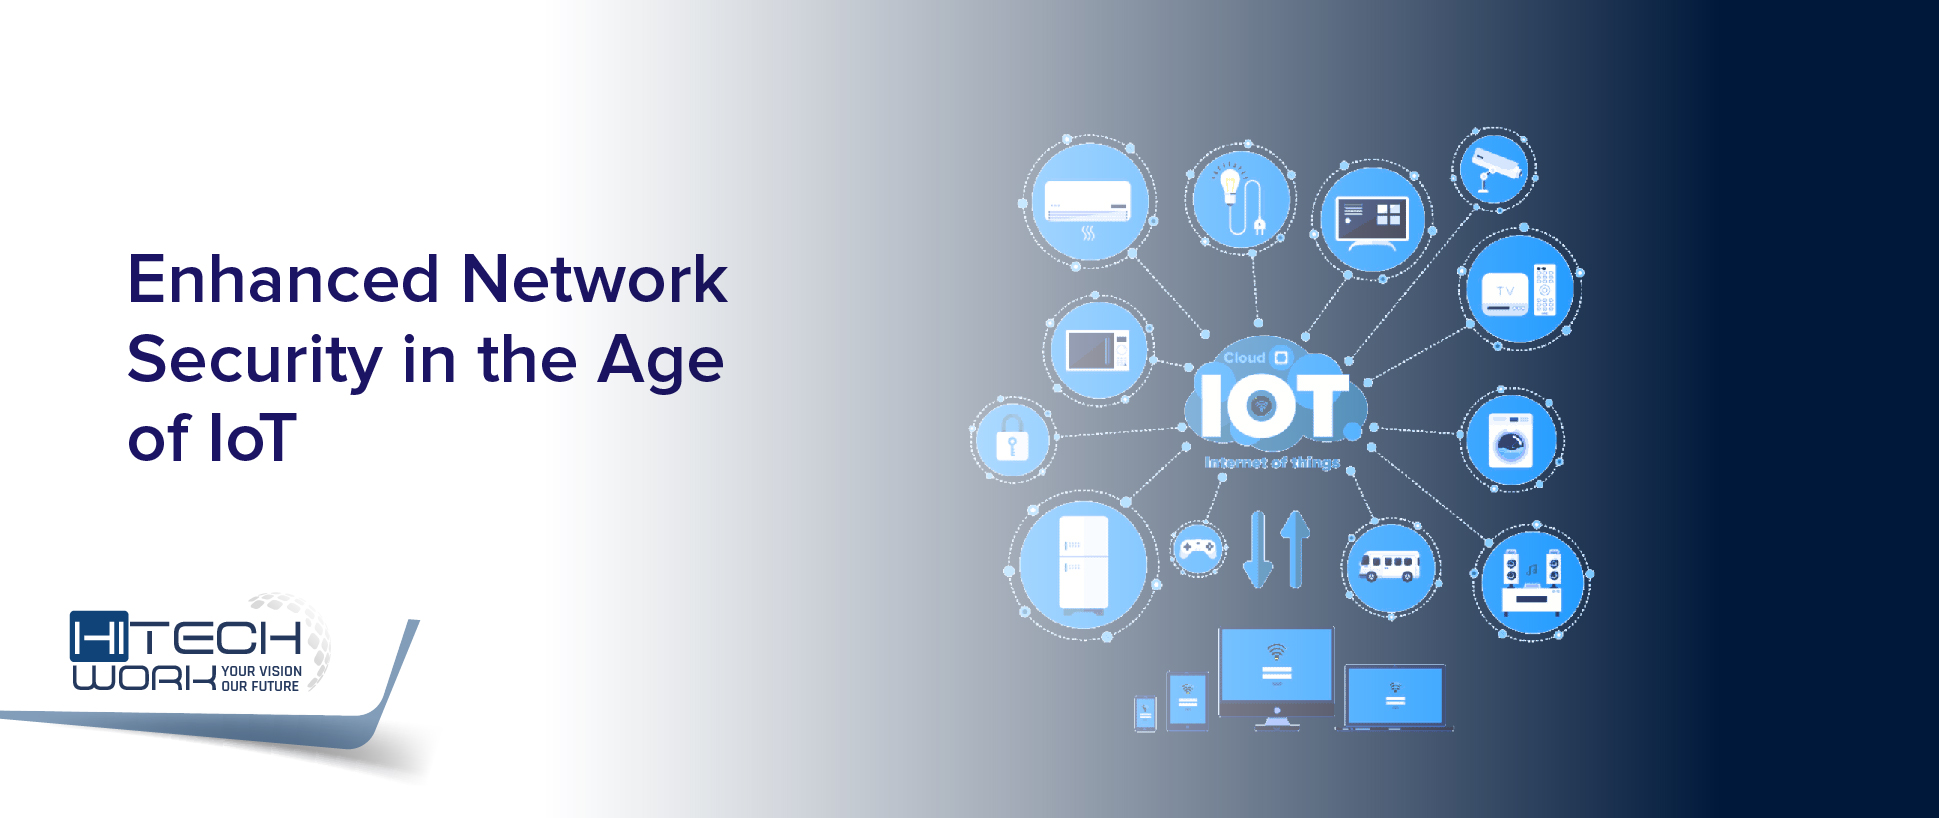 Network Security in the Age of IoT